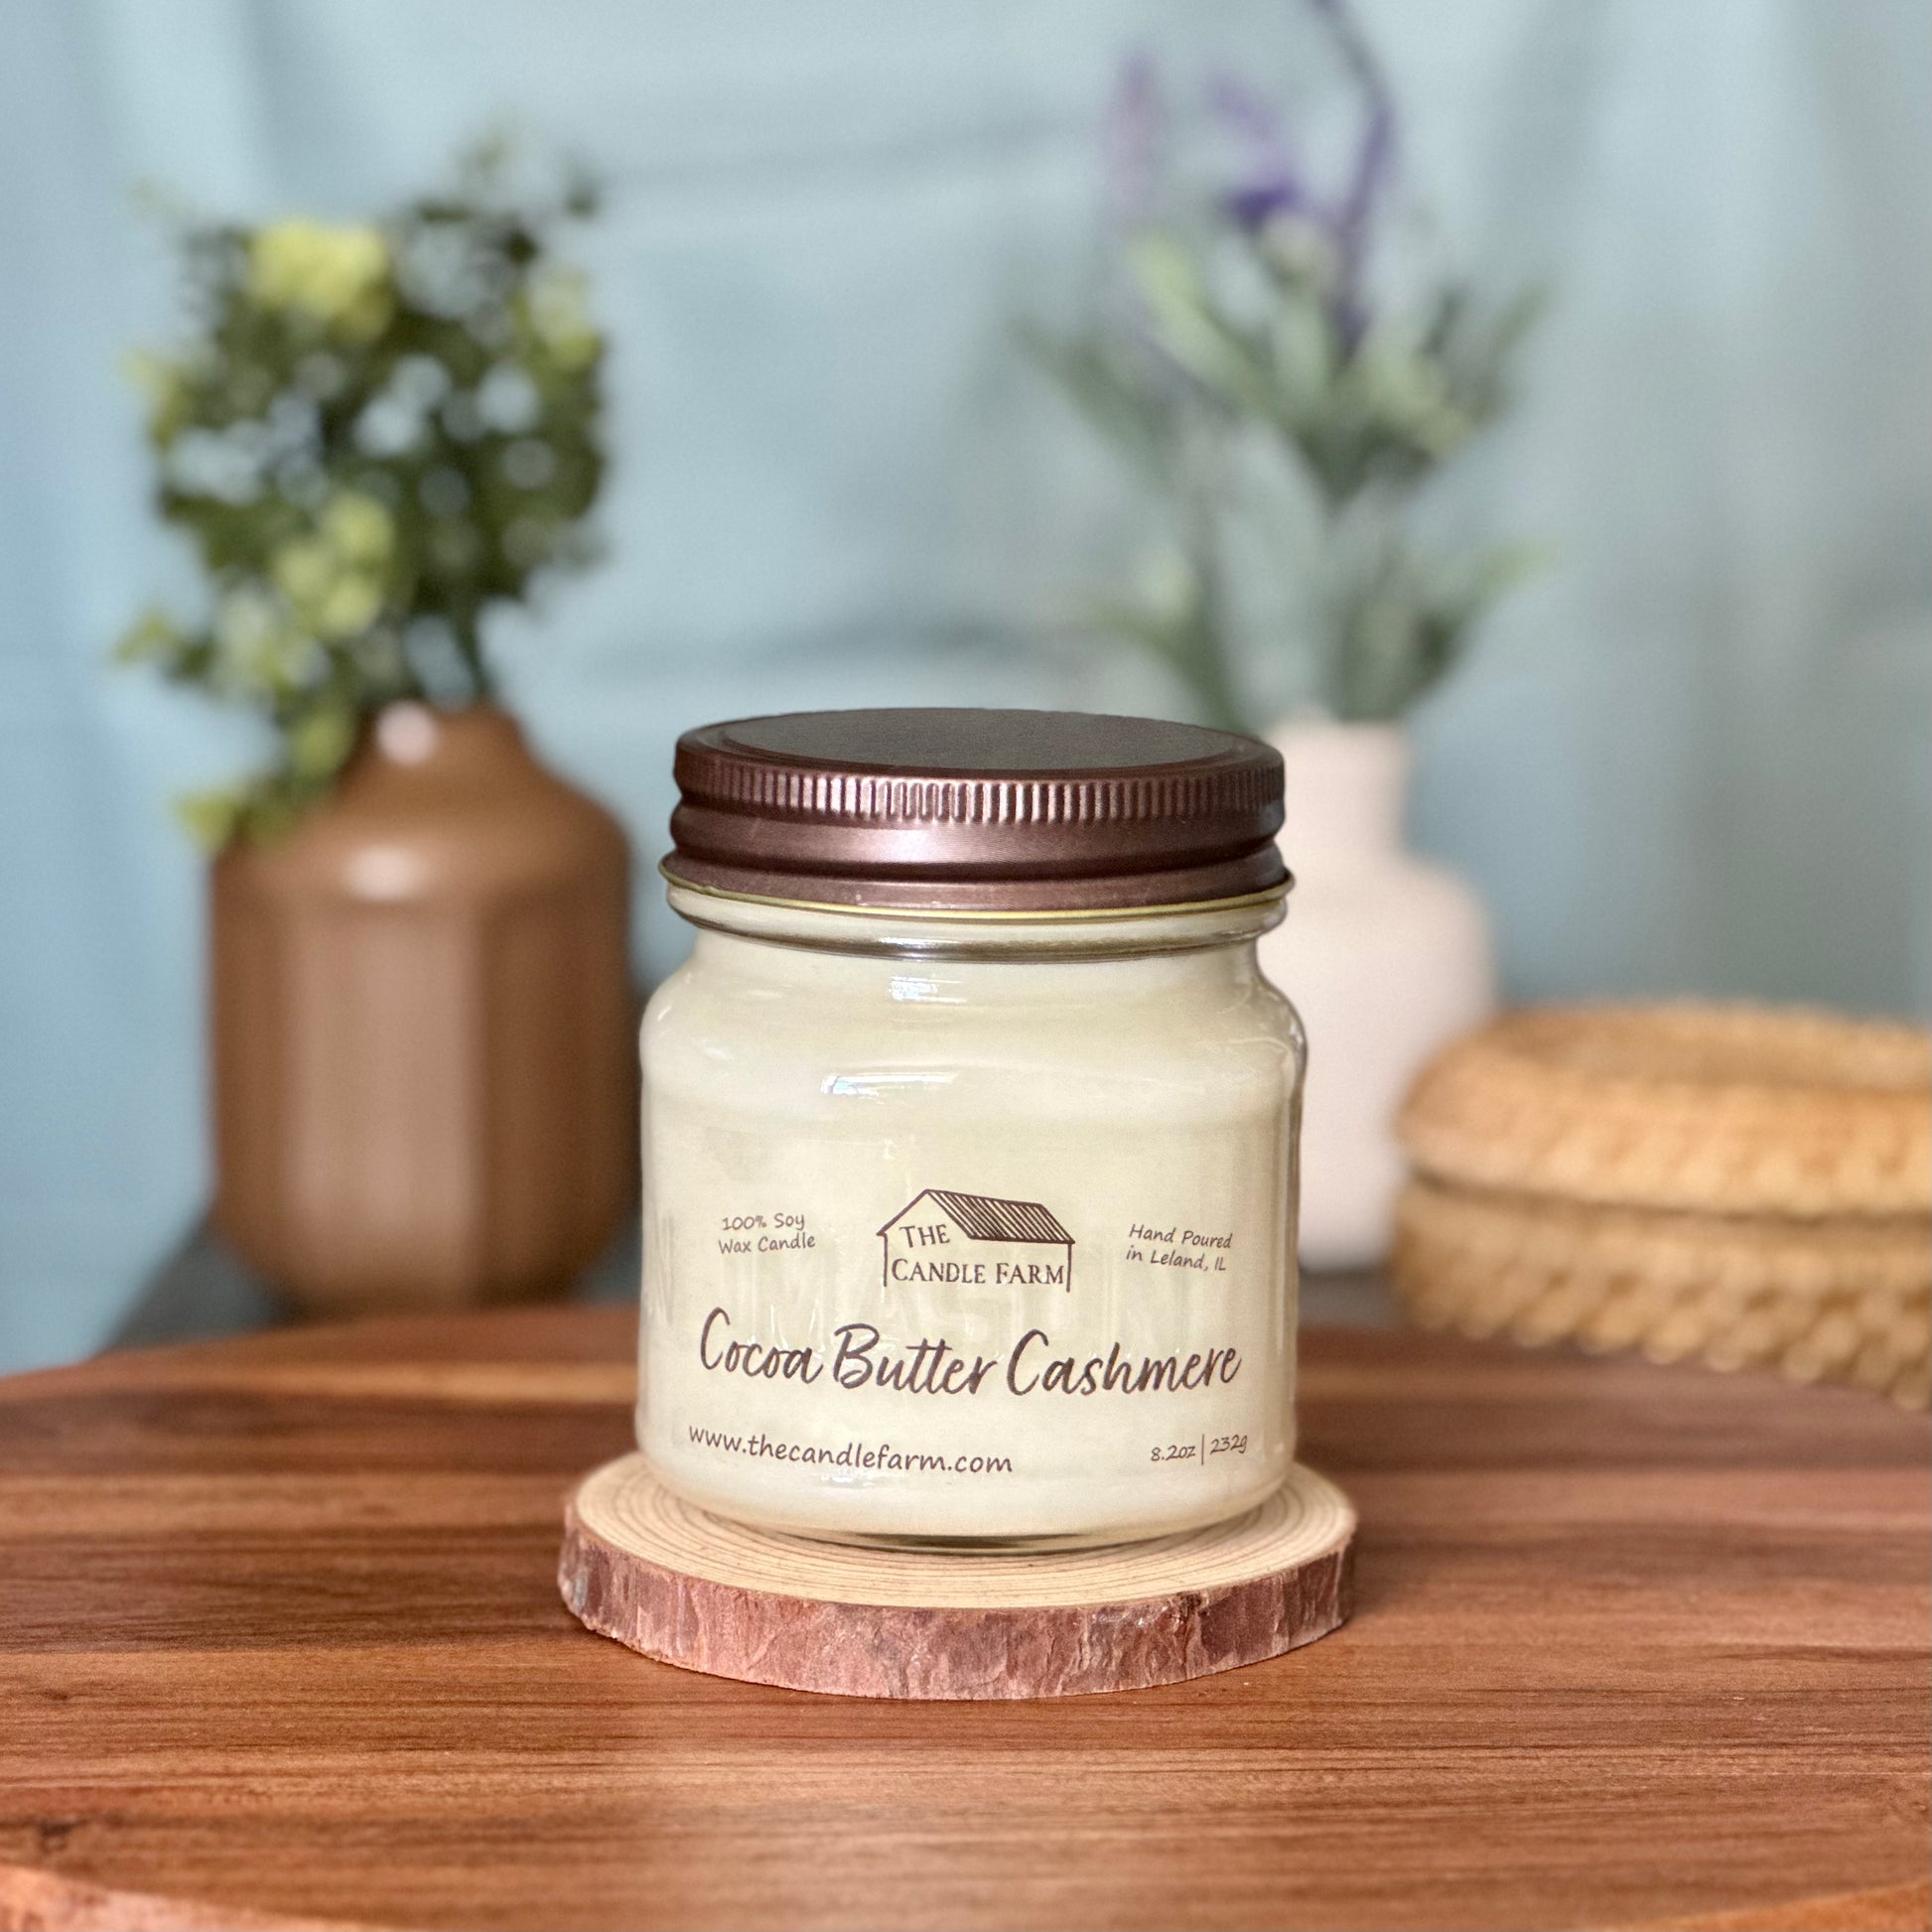 Cocoa Butter Cashmere 8 oz candle